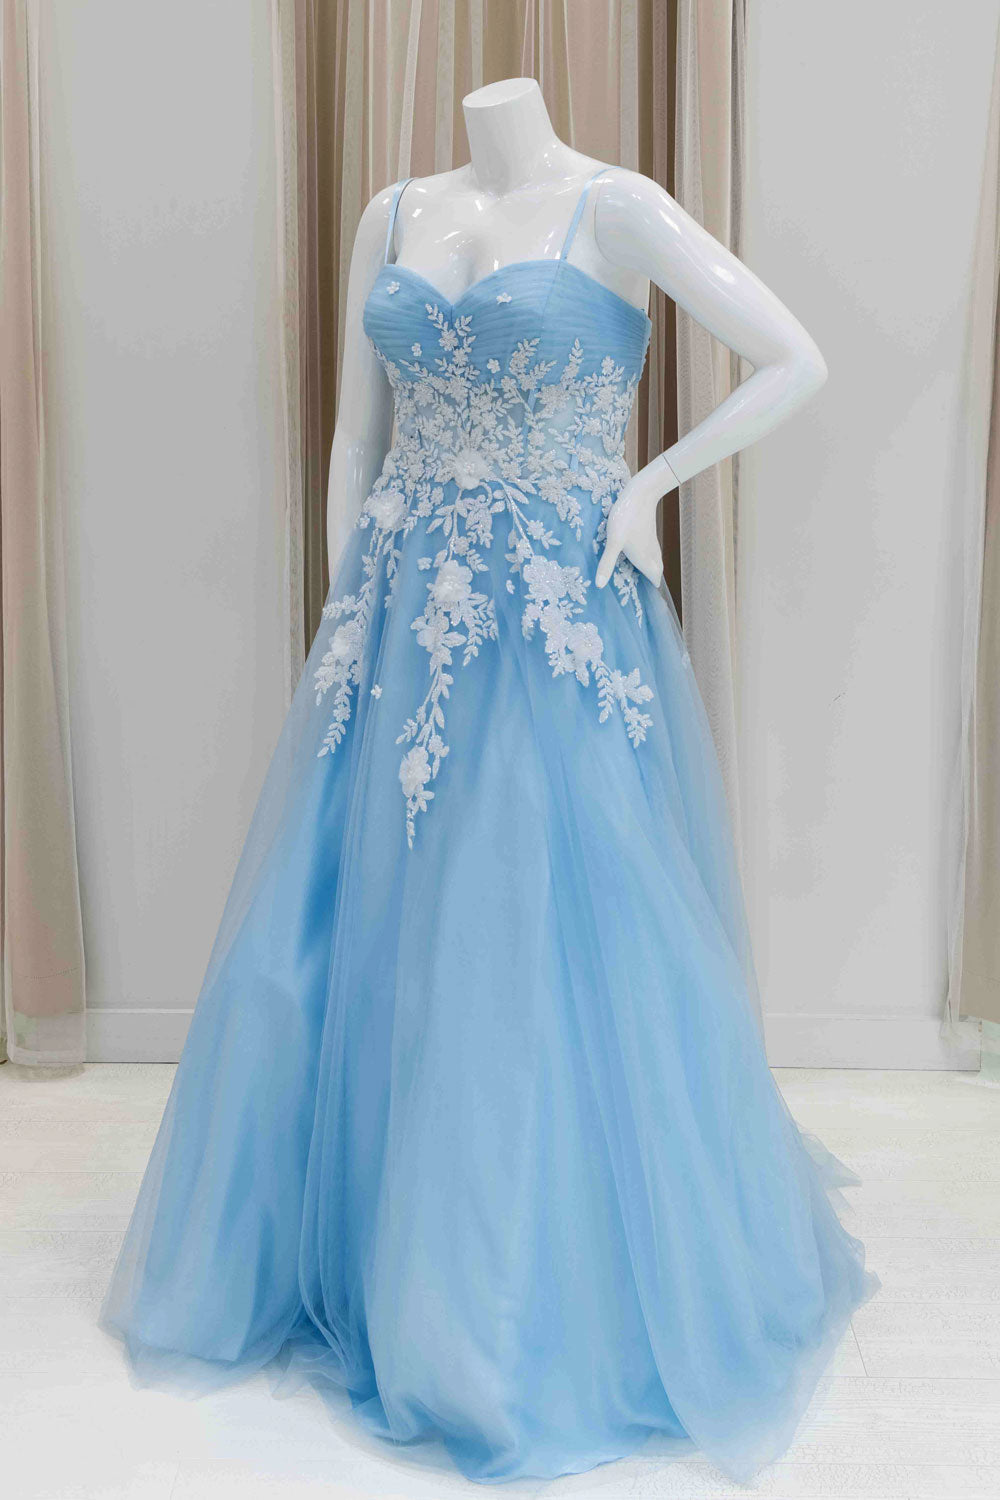 Baby Blue and White Applique Tulle Ball Gown